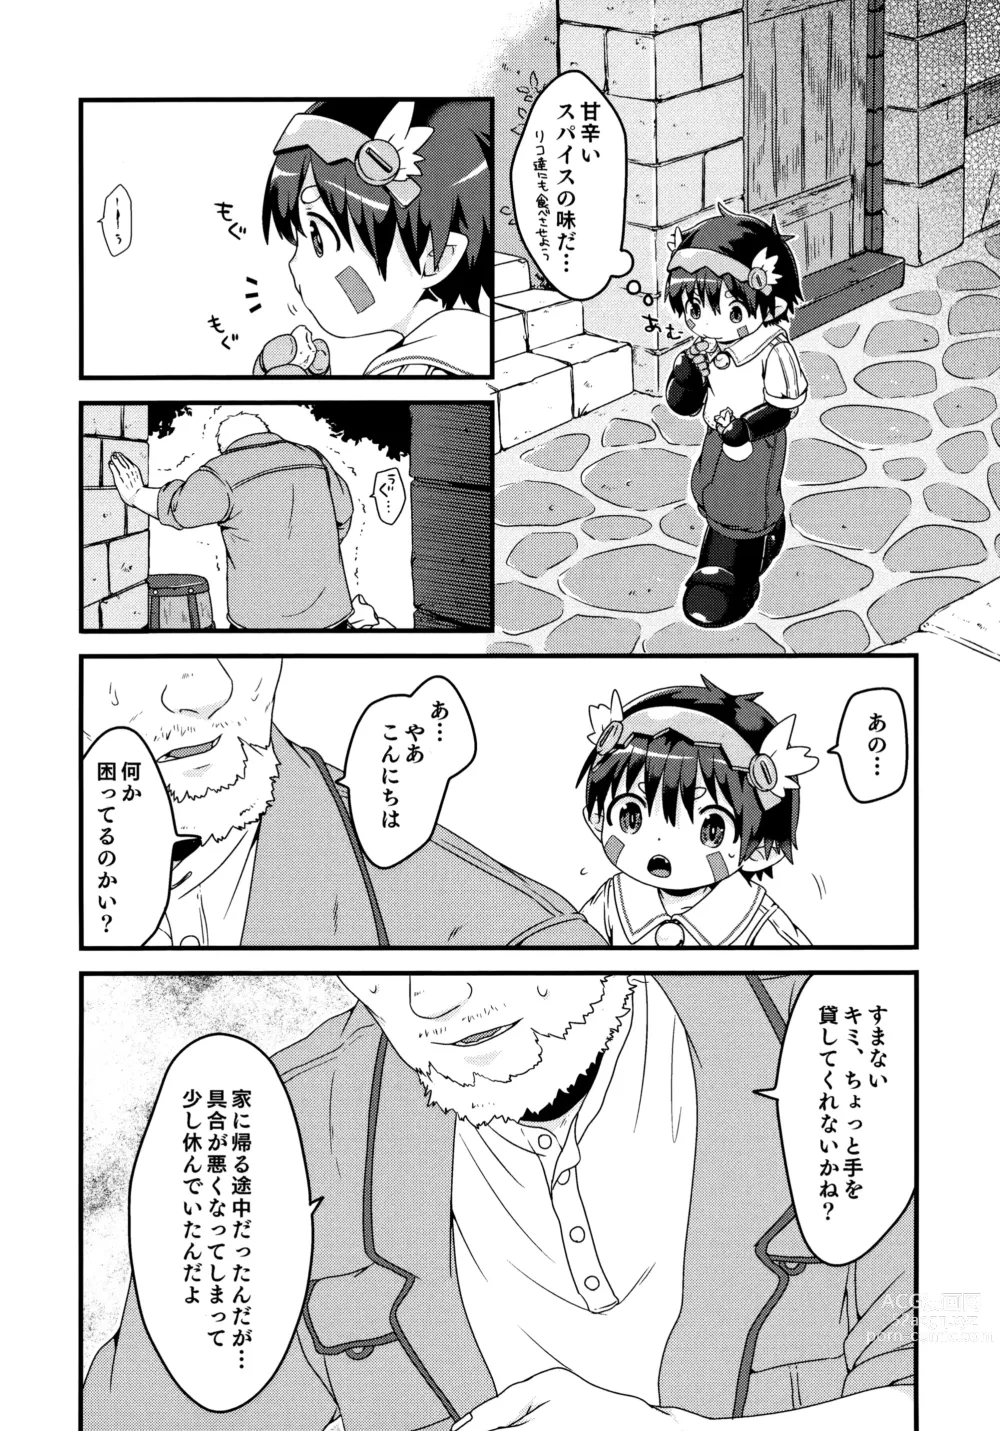 Page 5 of doujinshi Do Aubades Dream of Electric Sheep?